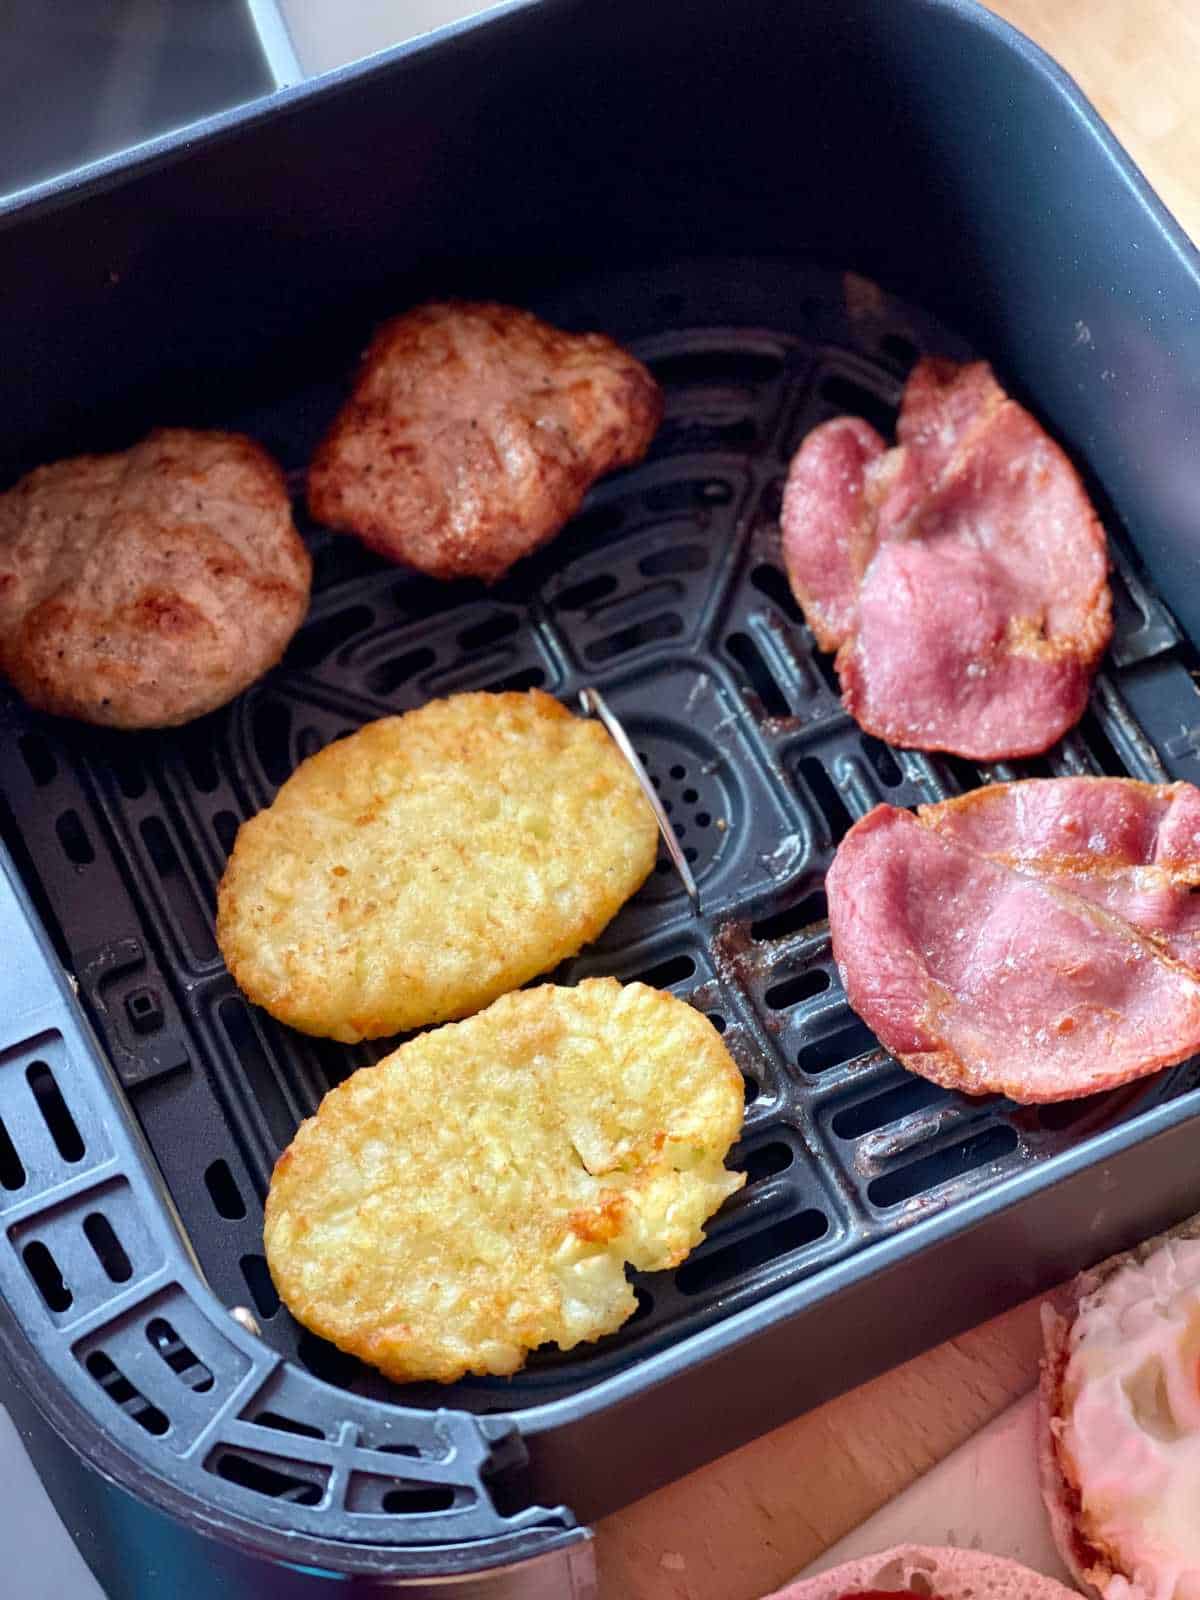 photo of Step air fried ingredients for McMuffins - seen in air fryer basket of Instant Vortex - hash browns, bacon rashers, sausage patties